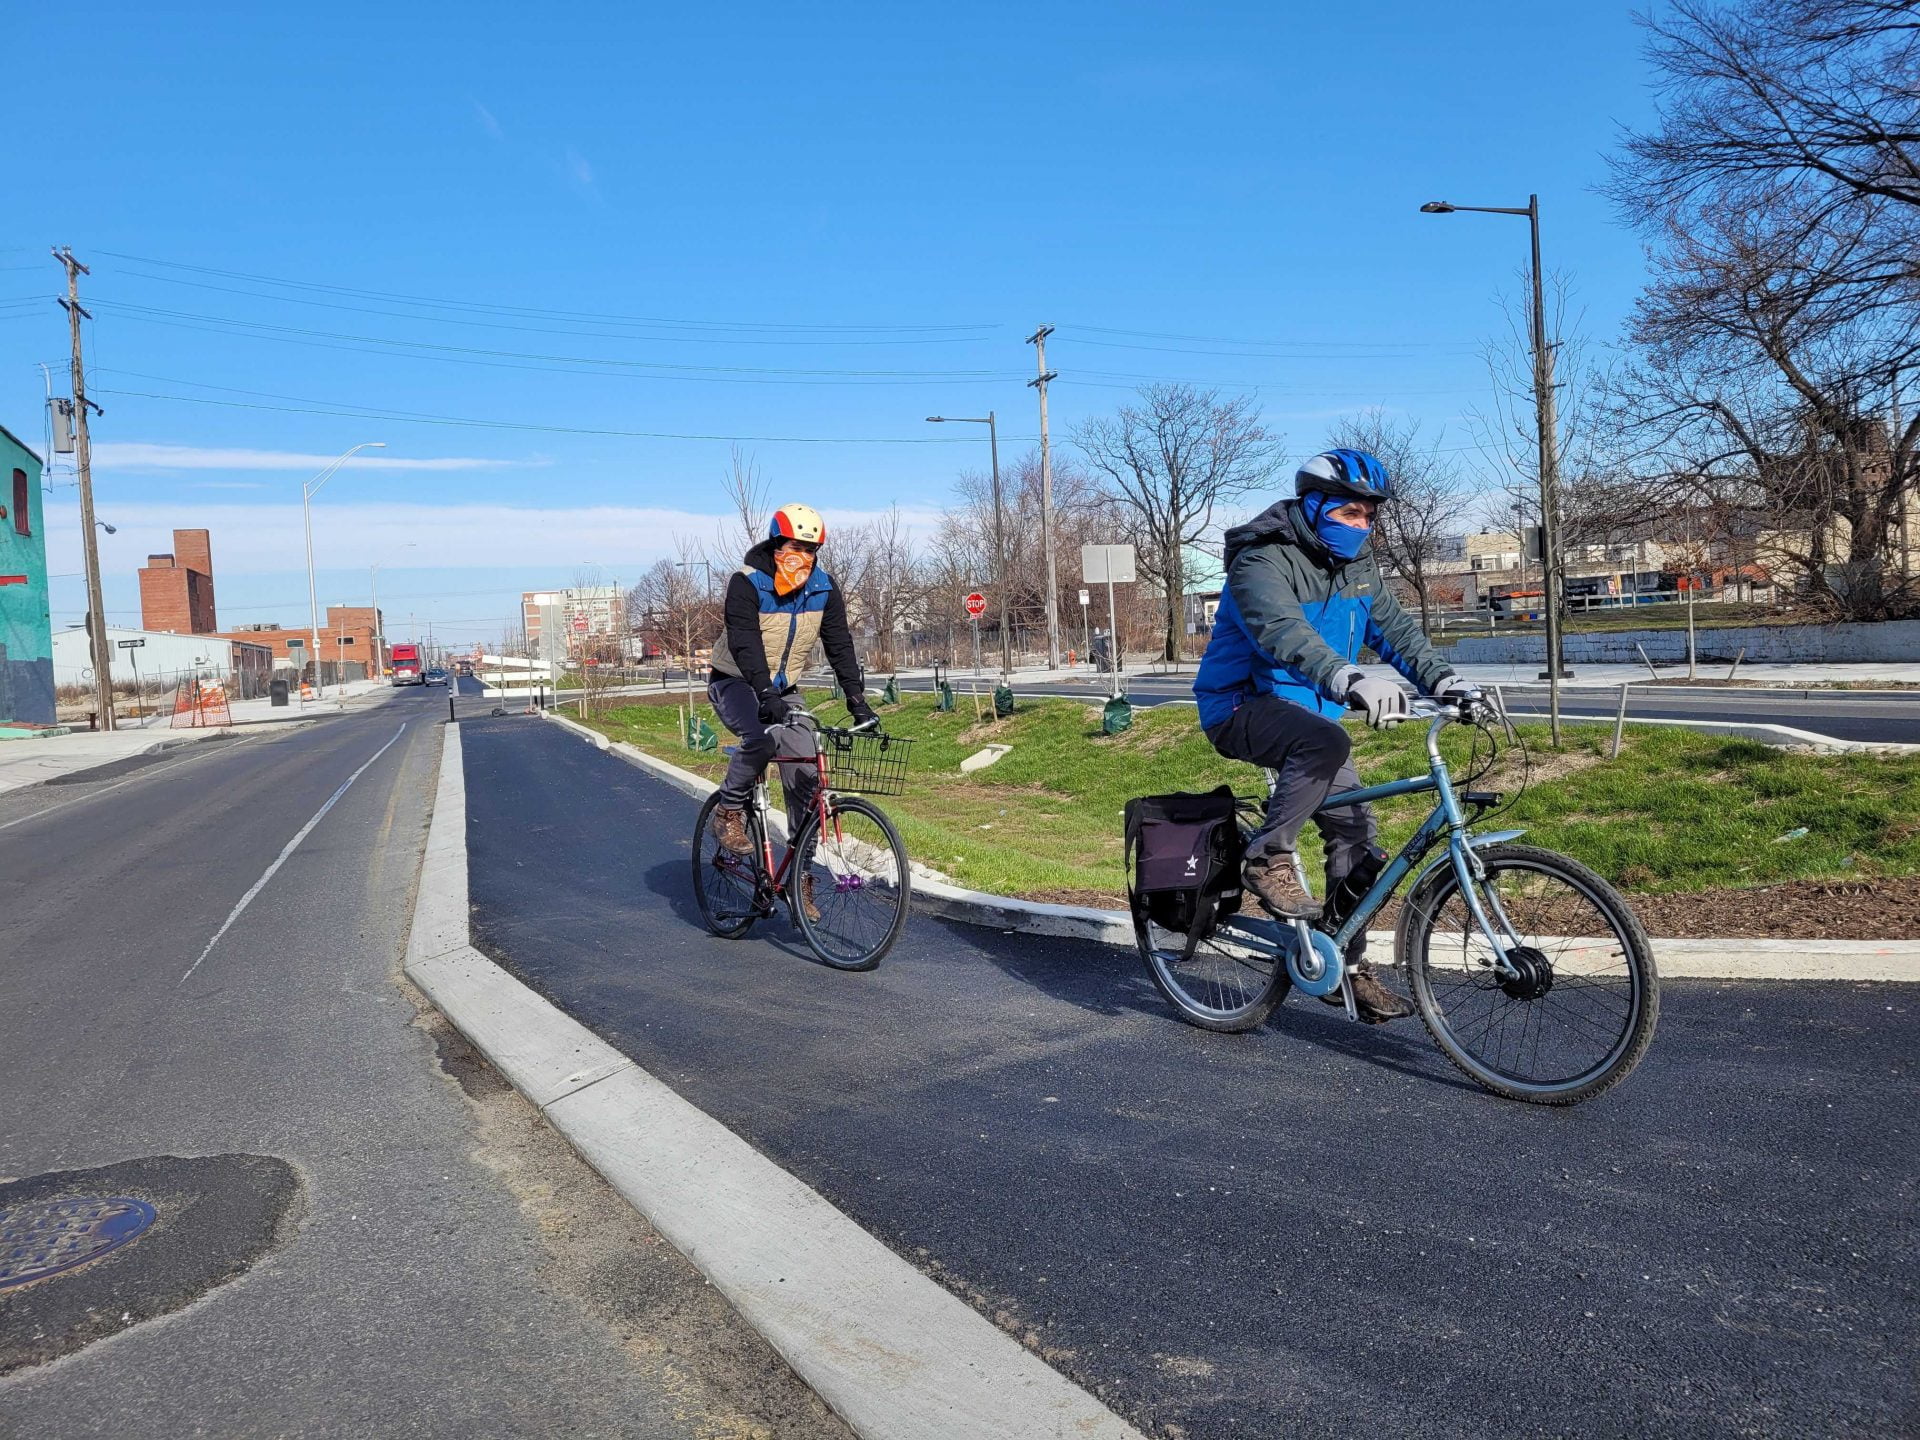 John & Randy ride on the new American Street protected bike lane in early 2021